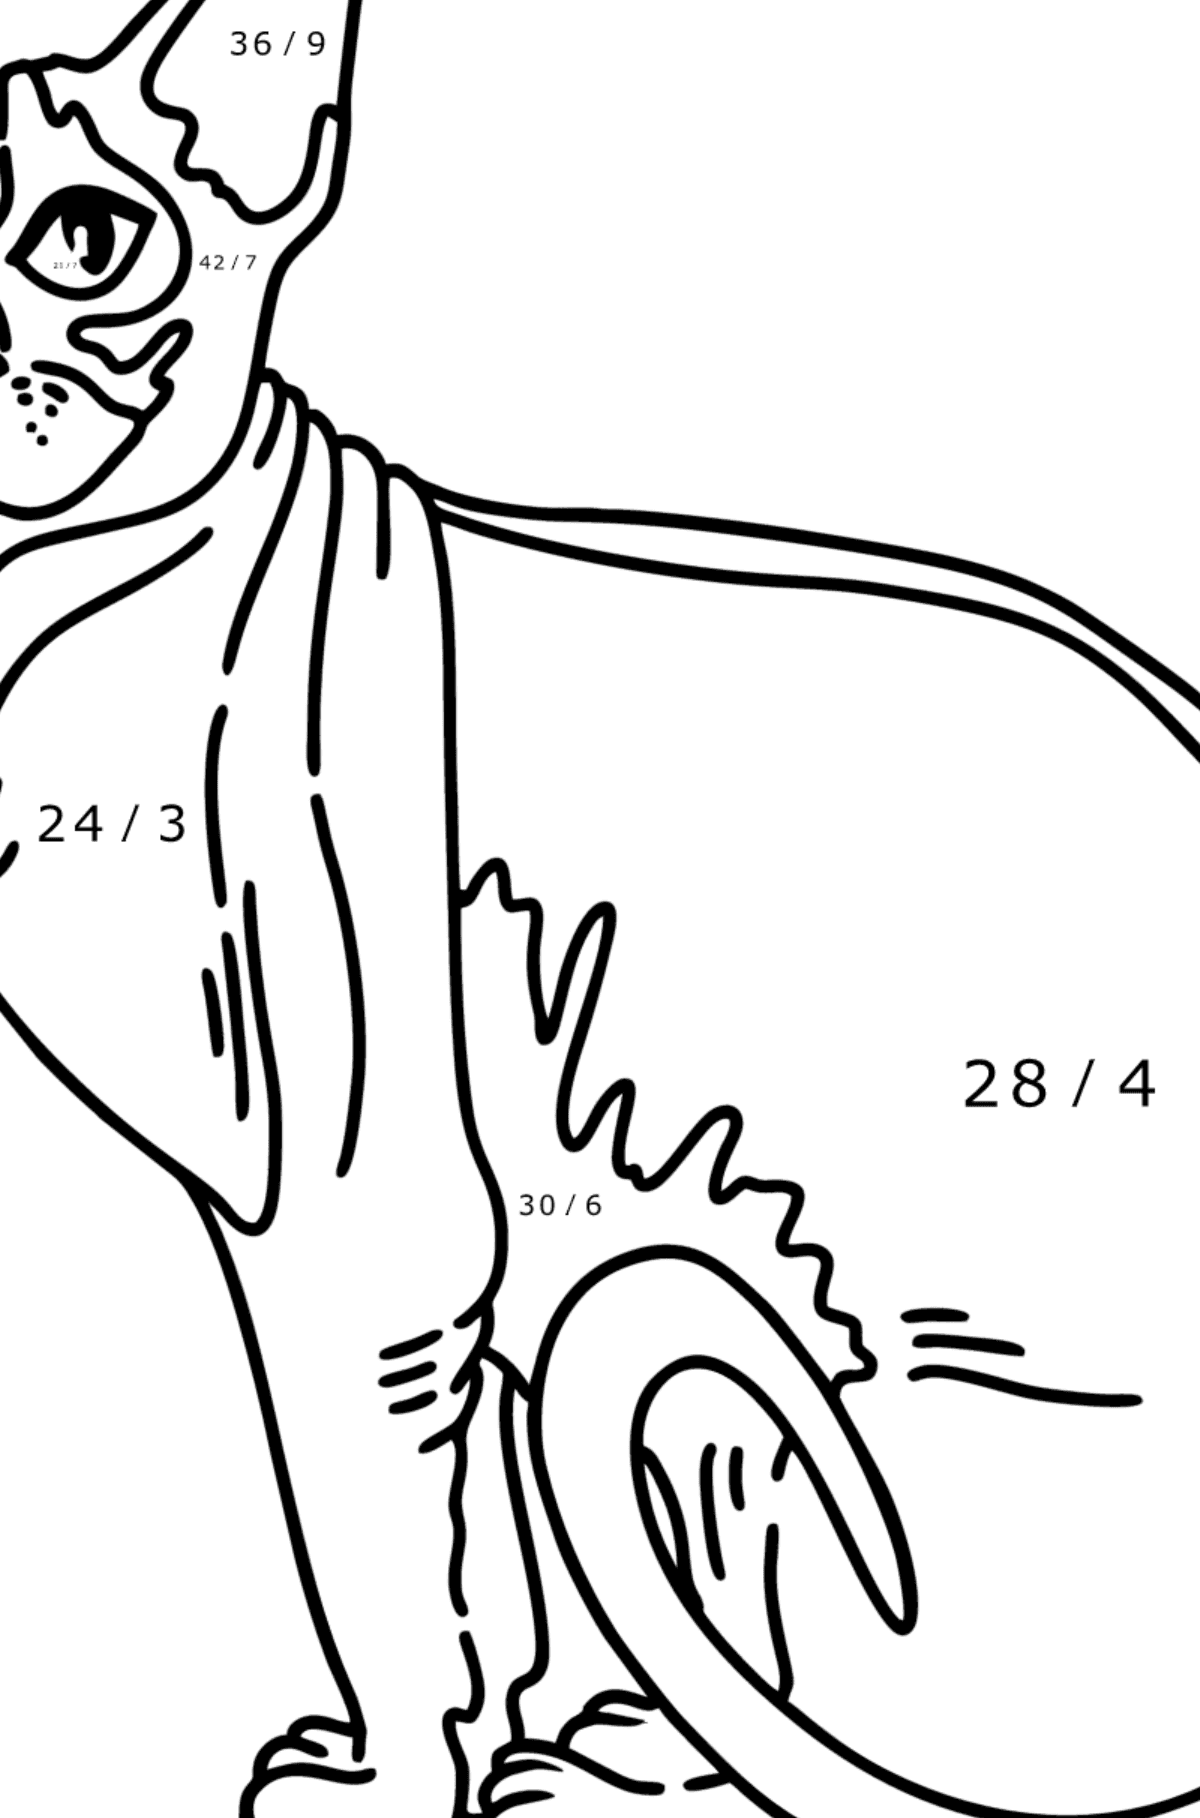 Sphynx Cat coloring page - Math Coloring - Division for Kids